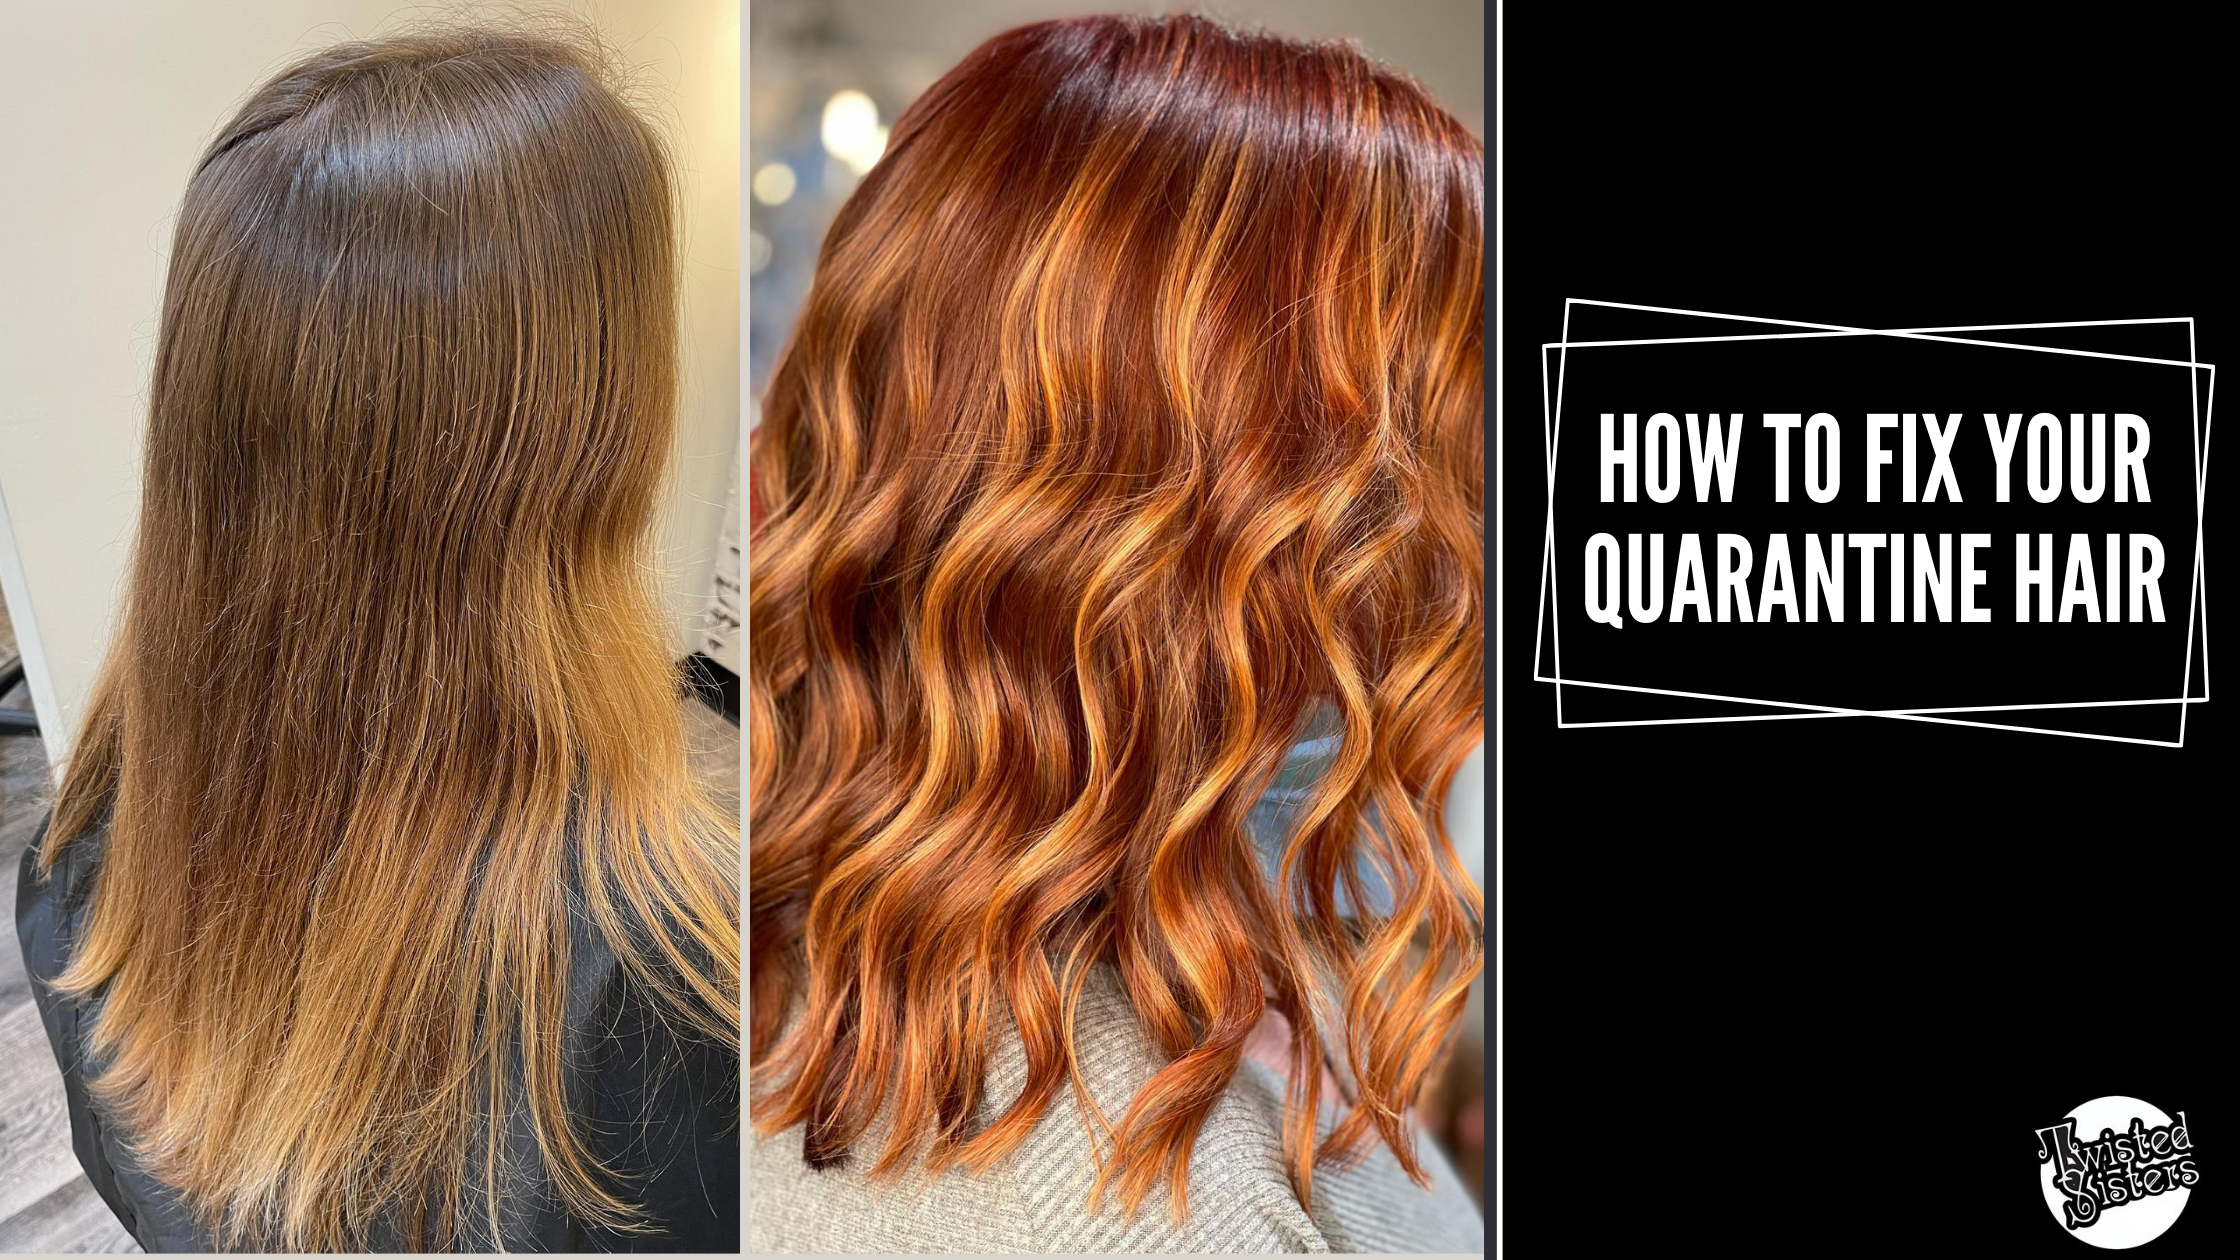 How to Fix Your DIY Hair Dye Job You Did in Quarantine - Twisted Sisters